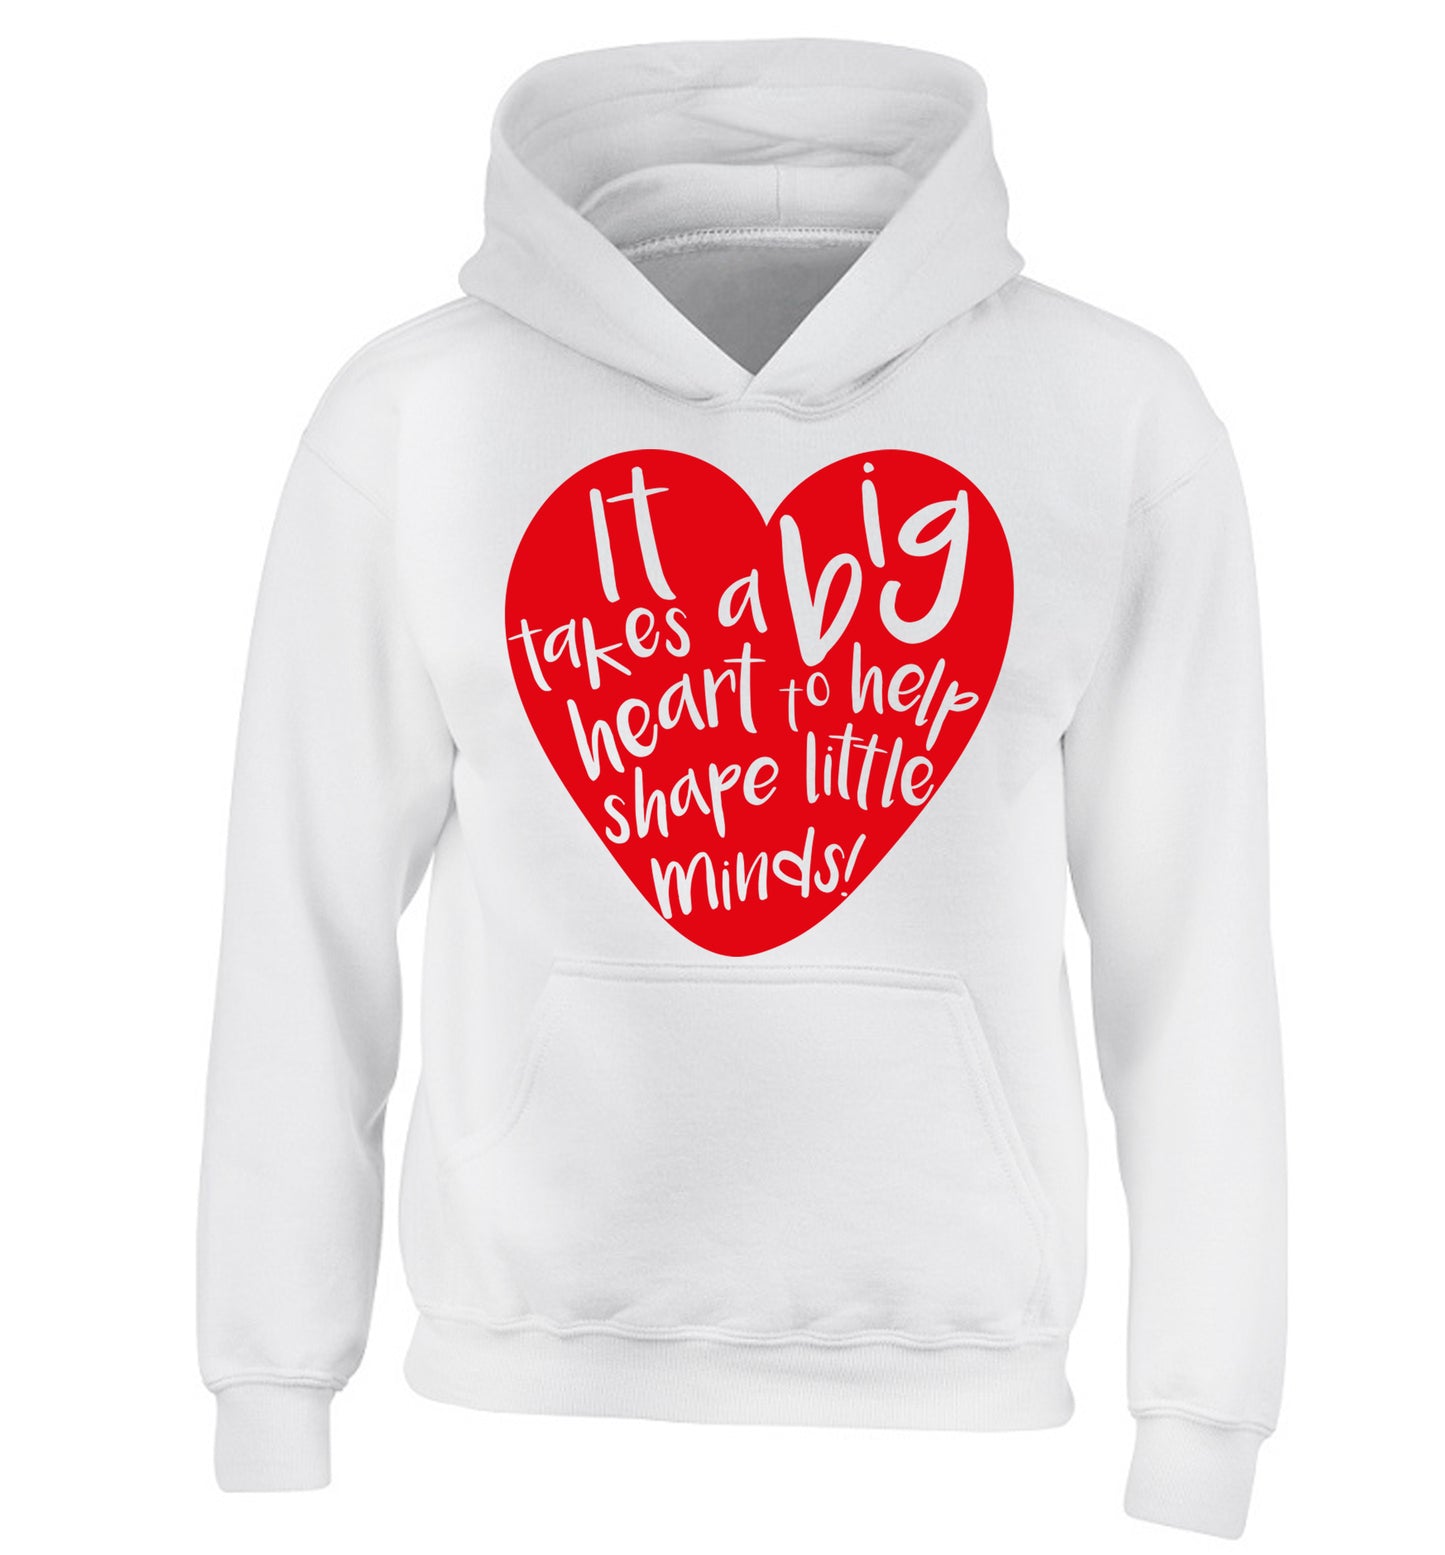 It takes a big heart to help teach little minds children's white hoodie 12-14 Years